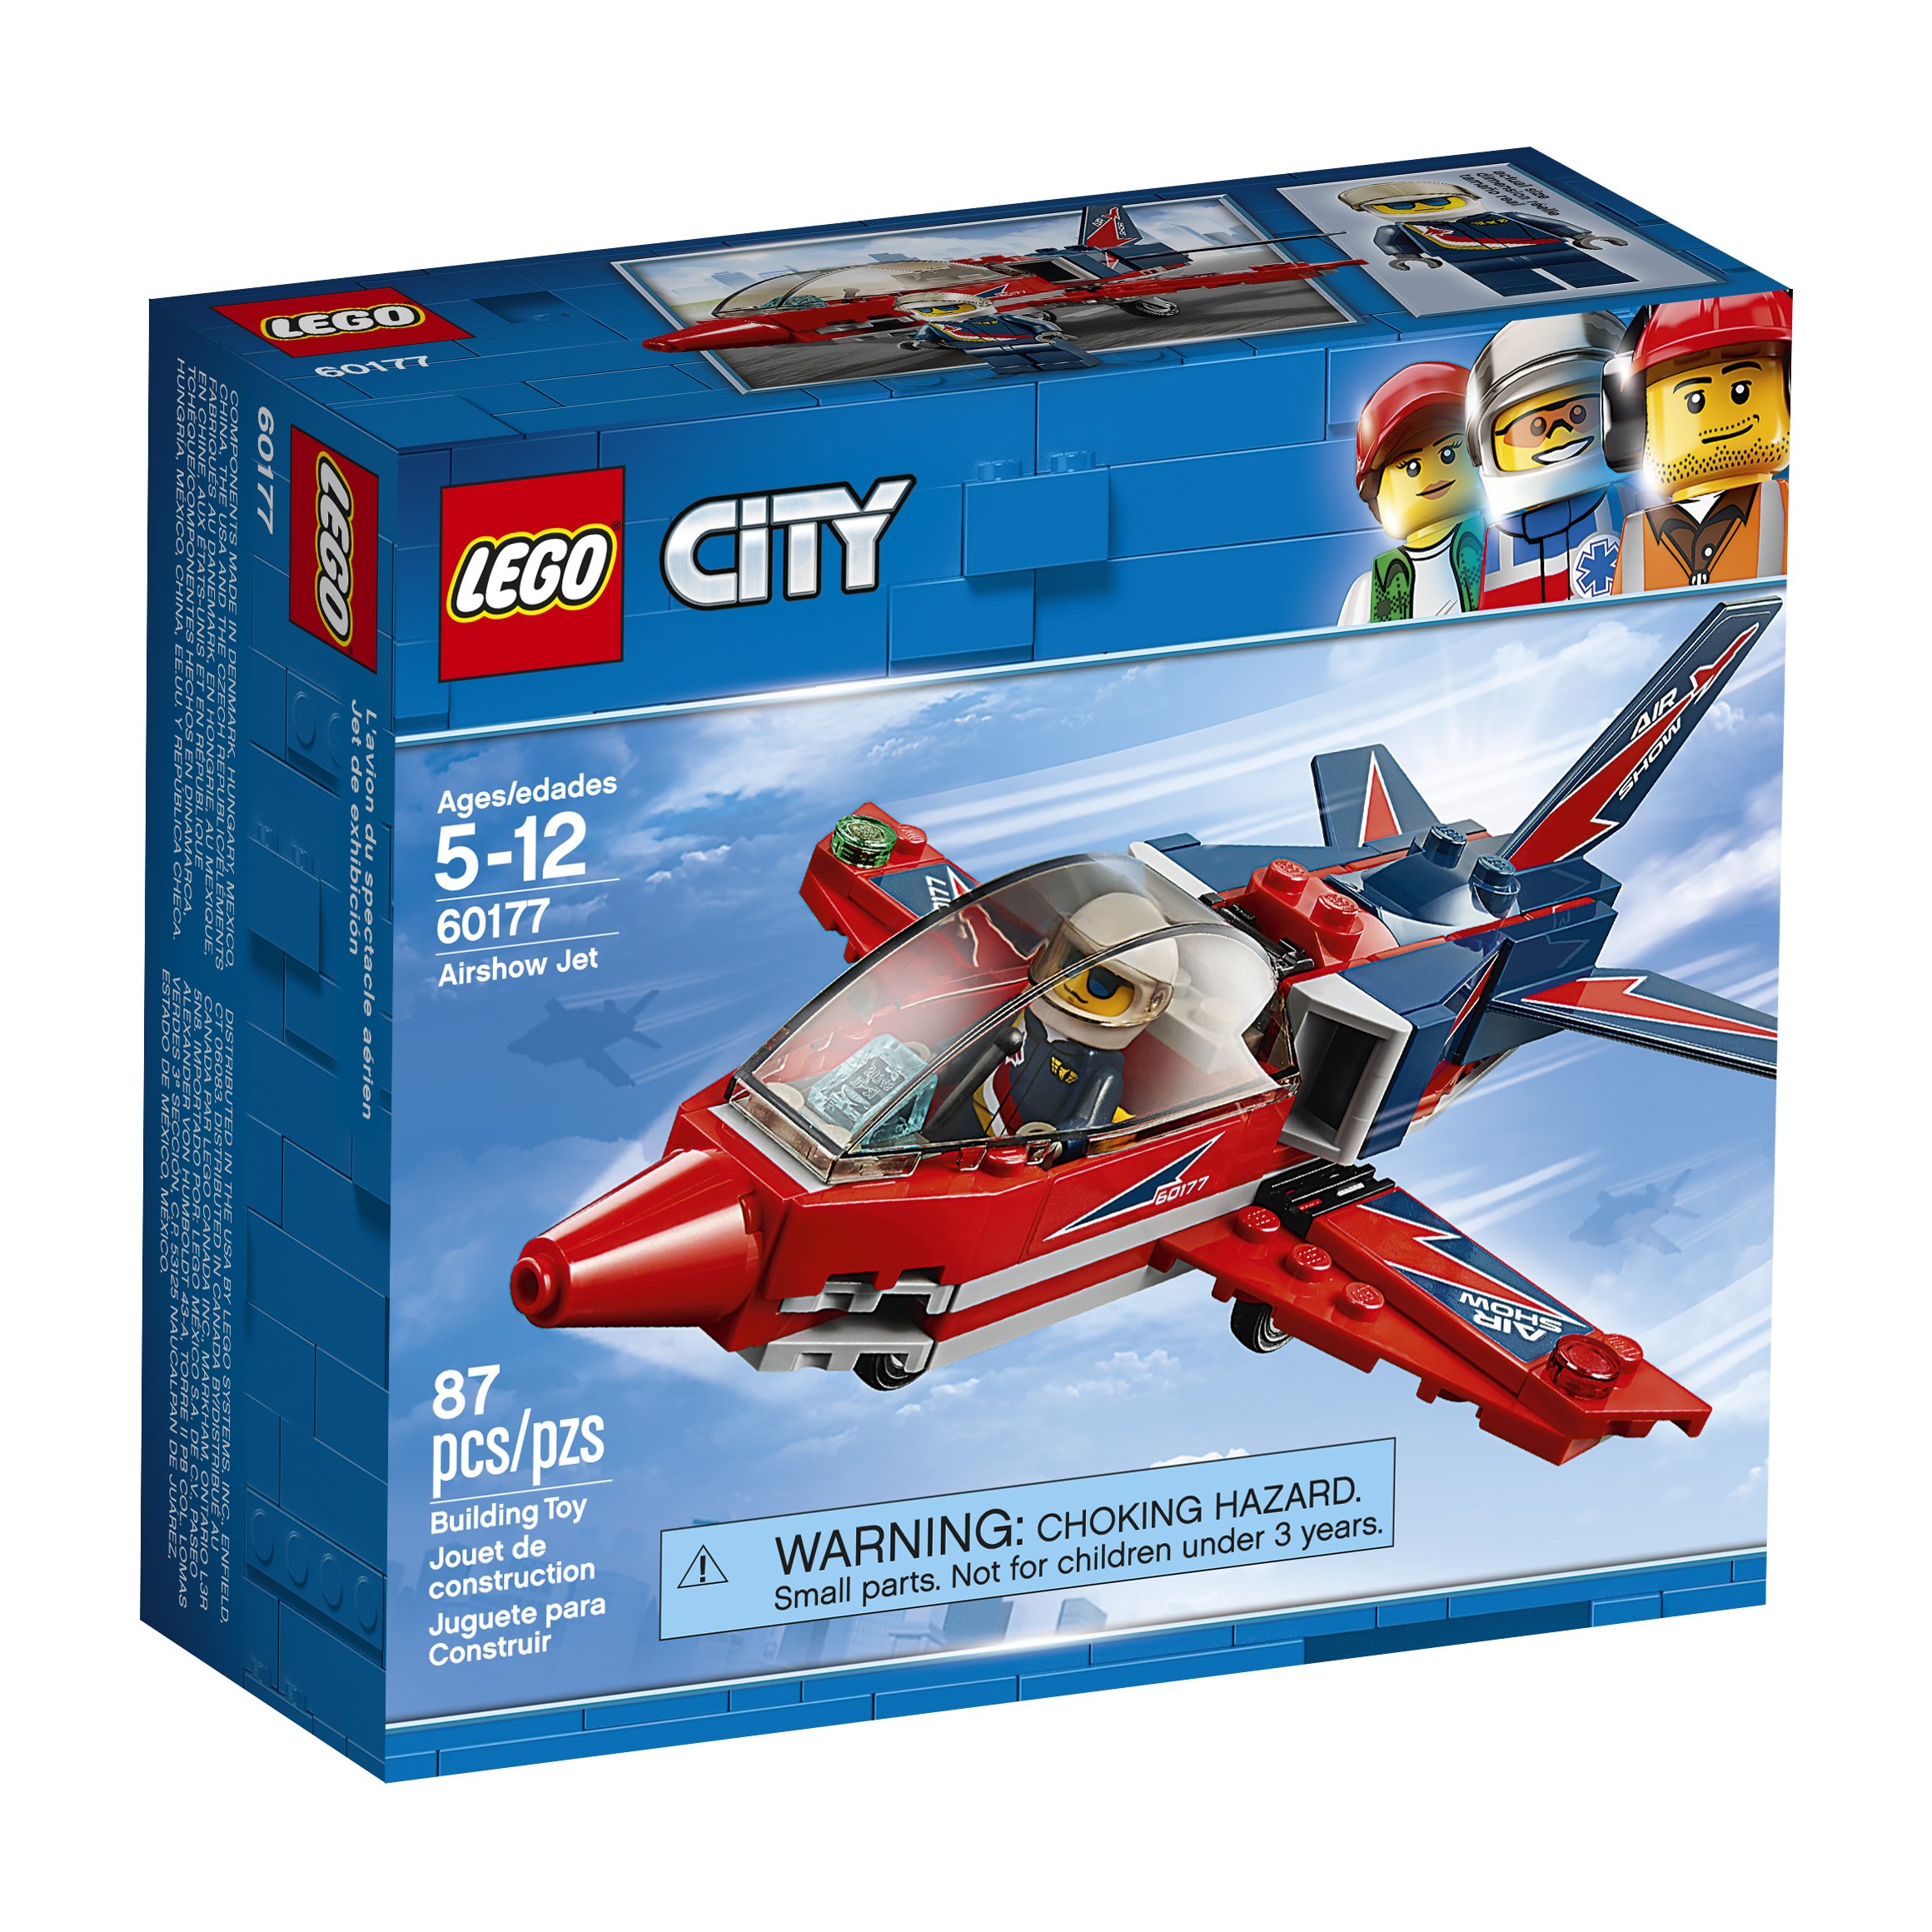 Book Cover LEGO City Airshow Jet 60177 Building Kit (87 Piece)